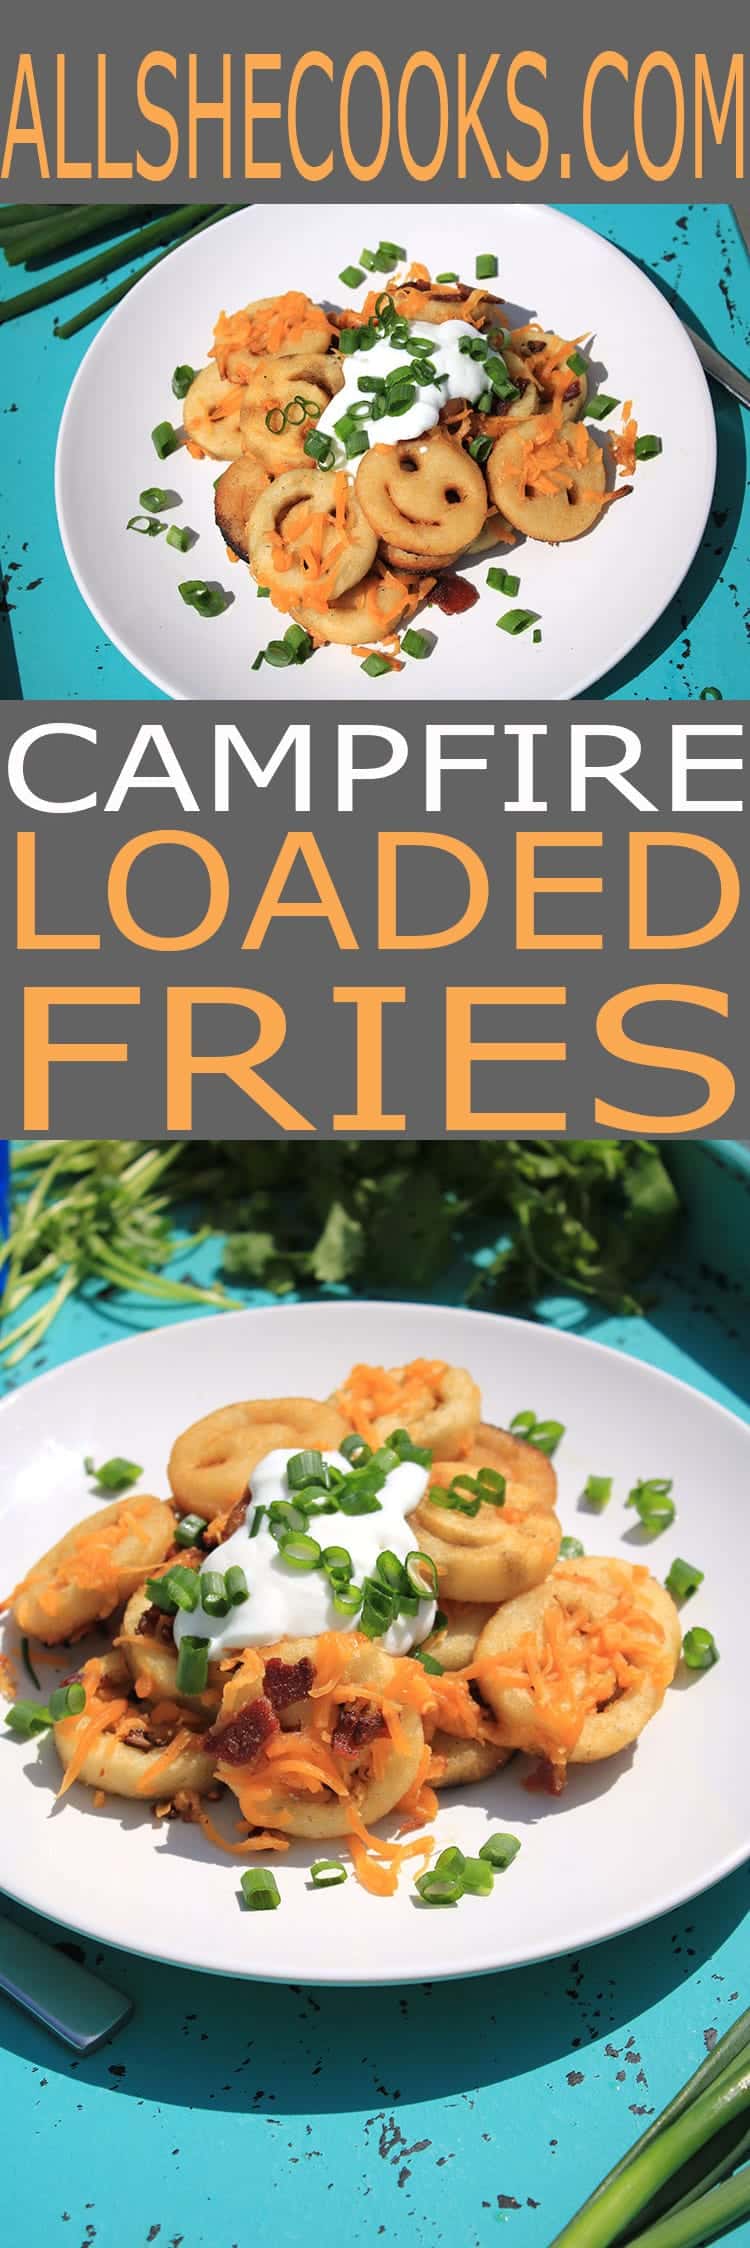 Campfire Loaded Fries are a kid-friendly easy campfire recipe that you can make in your backyard or at the campground. Tasty and easy to make.